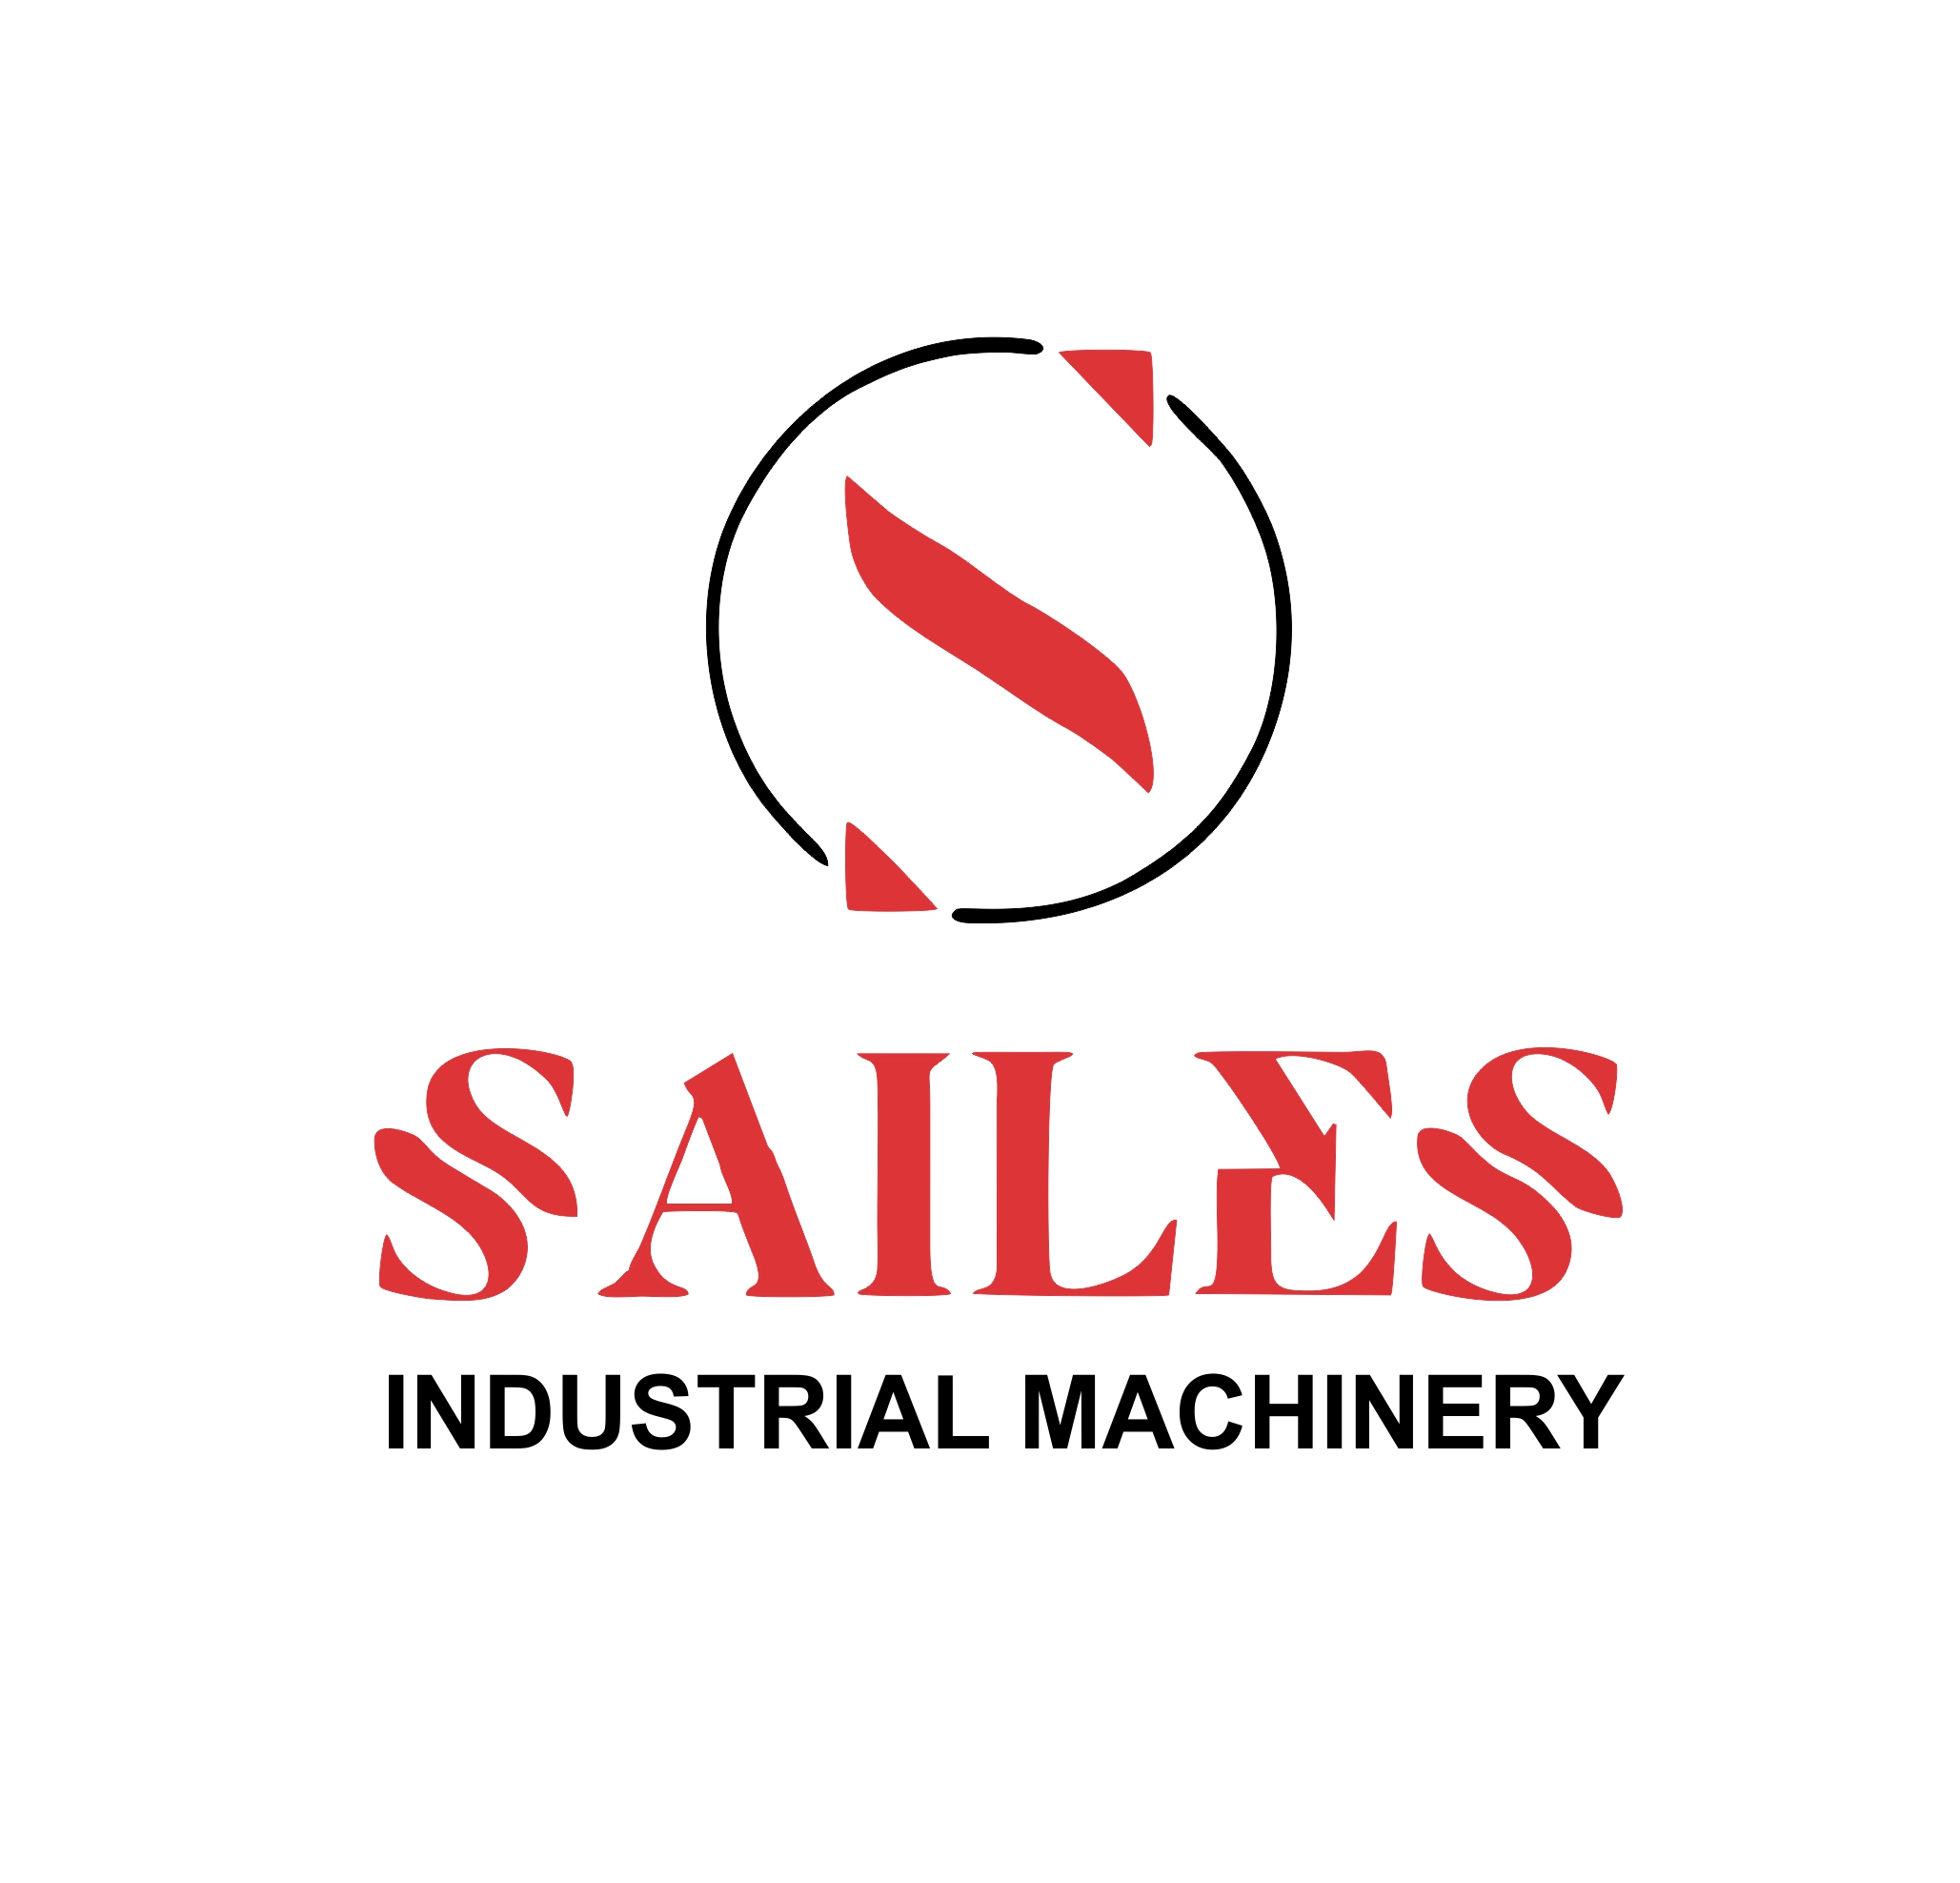 SAILES INDUSTRIAL MACHINERY